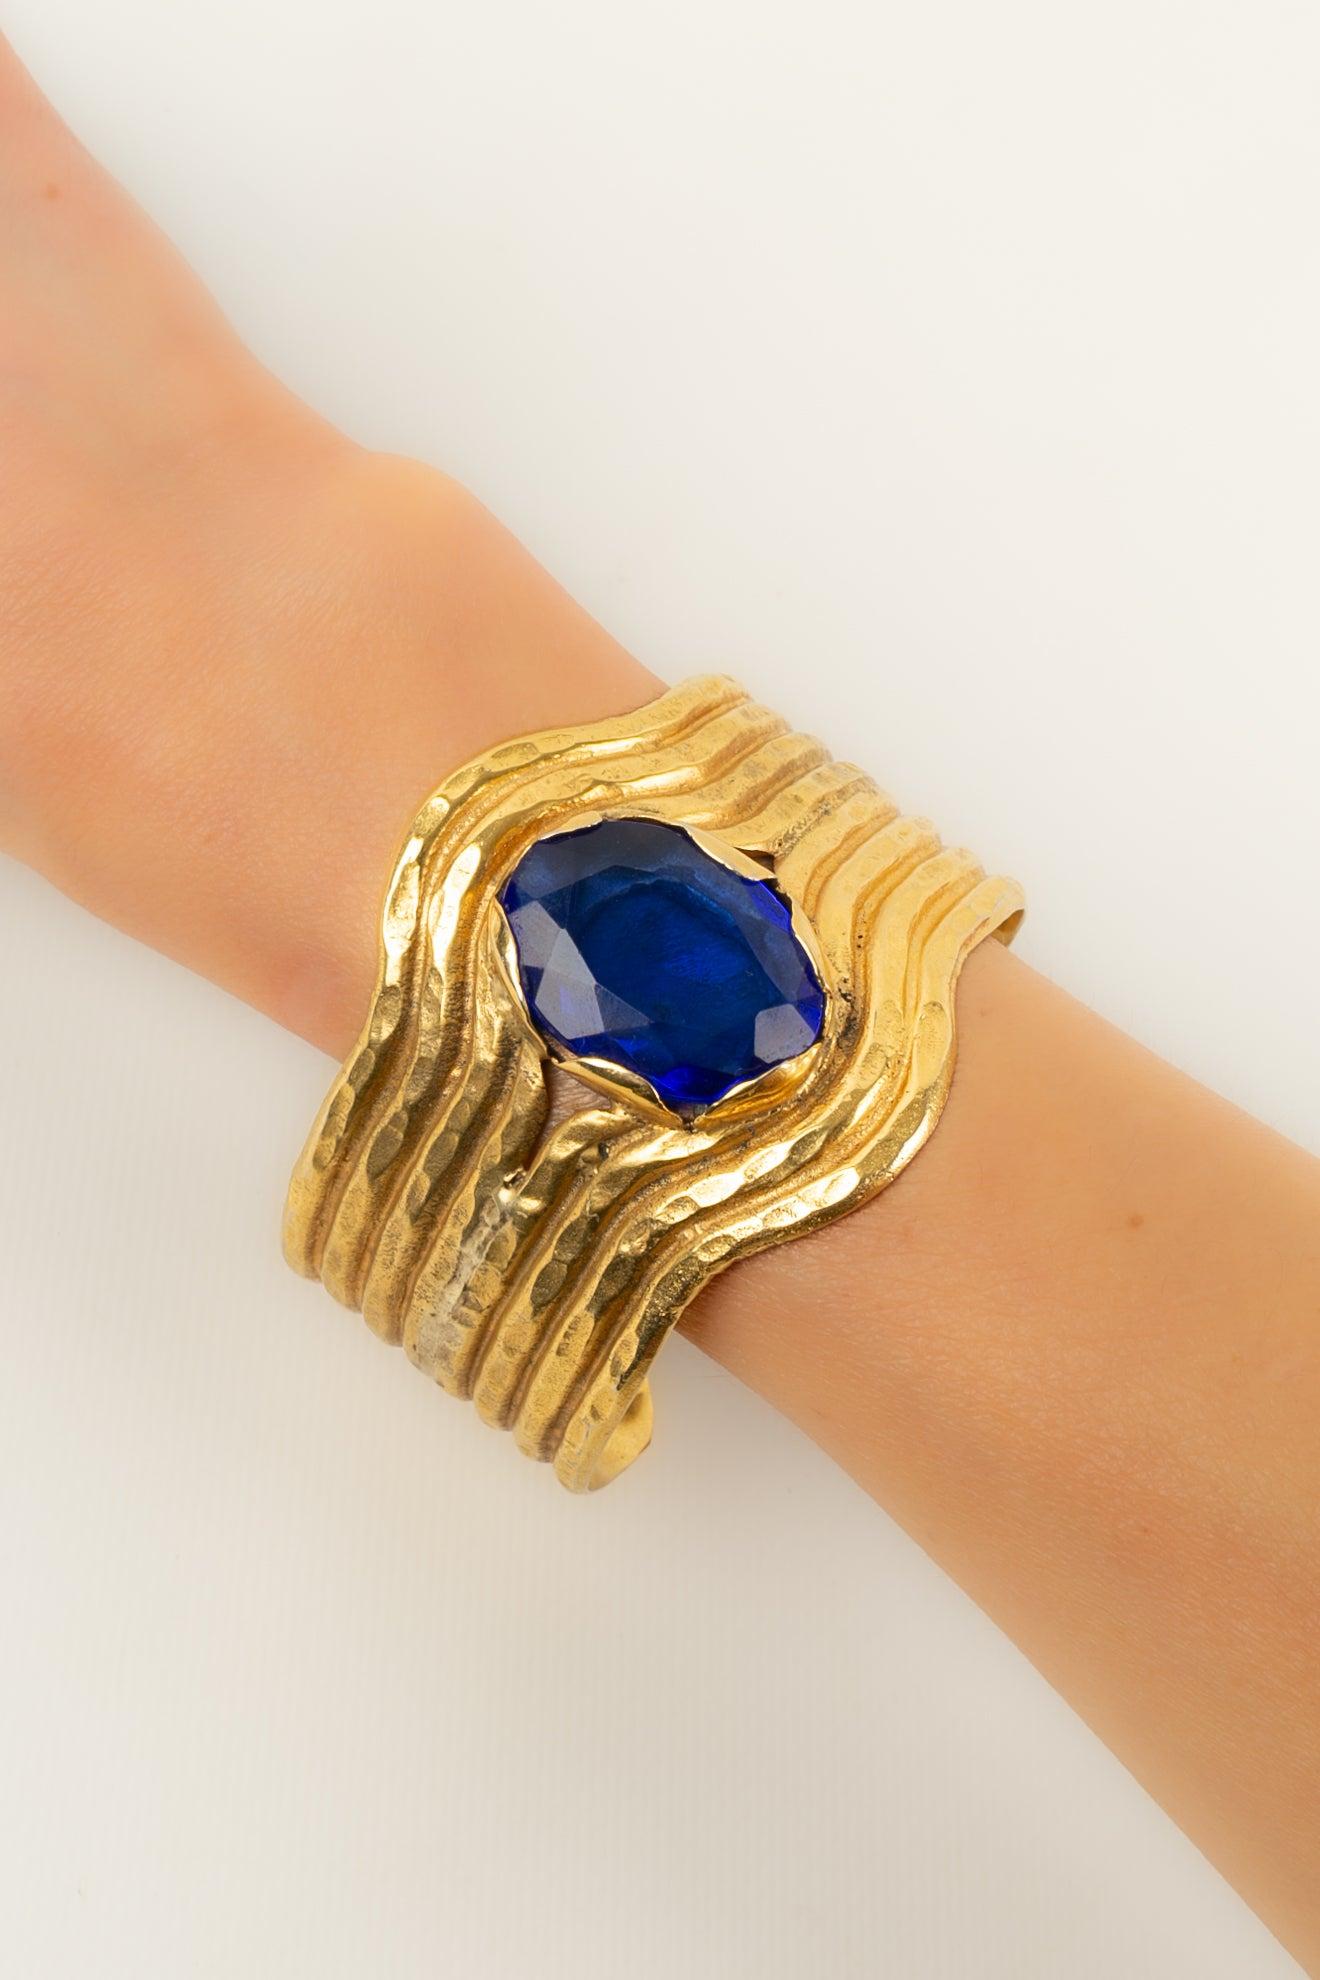 Gianfranco Ferré - (Made in Italy) Bracelet in golden metal with an impressive blue rhinestone on top.

Additional information:
Condition: Very good condition
Dimensions: Length: 17 cm

Seller Reference: BRA181
